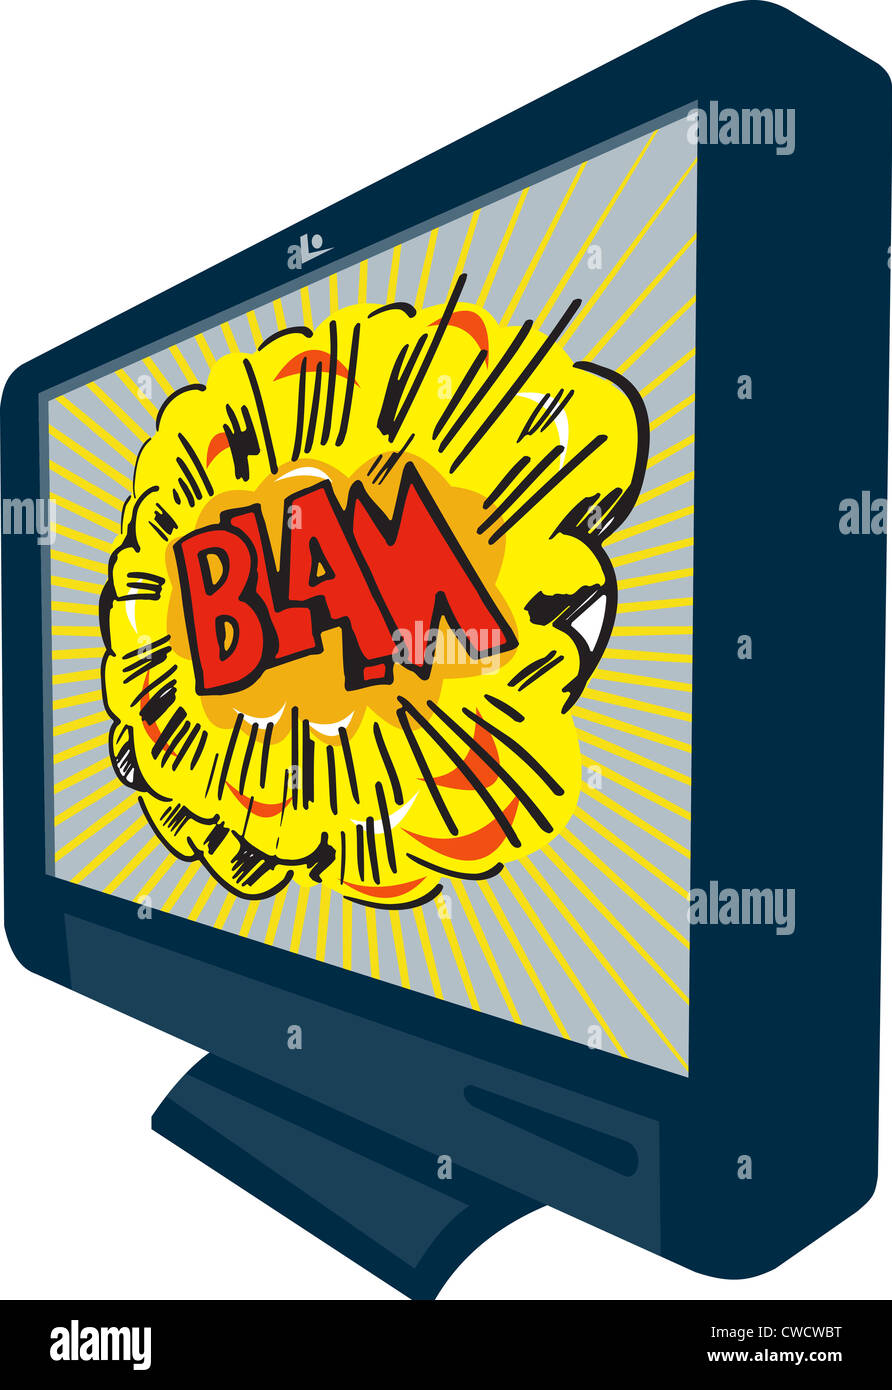 Illustration of an LCD Plasma television TV set on isolated white background with cartoon style explosion and text word blam. Stock Photo